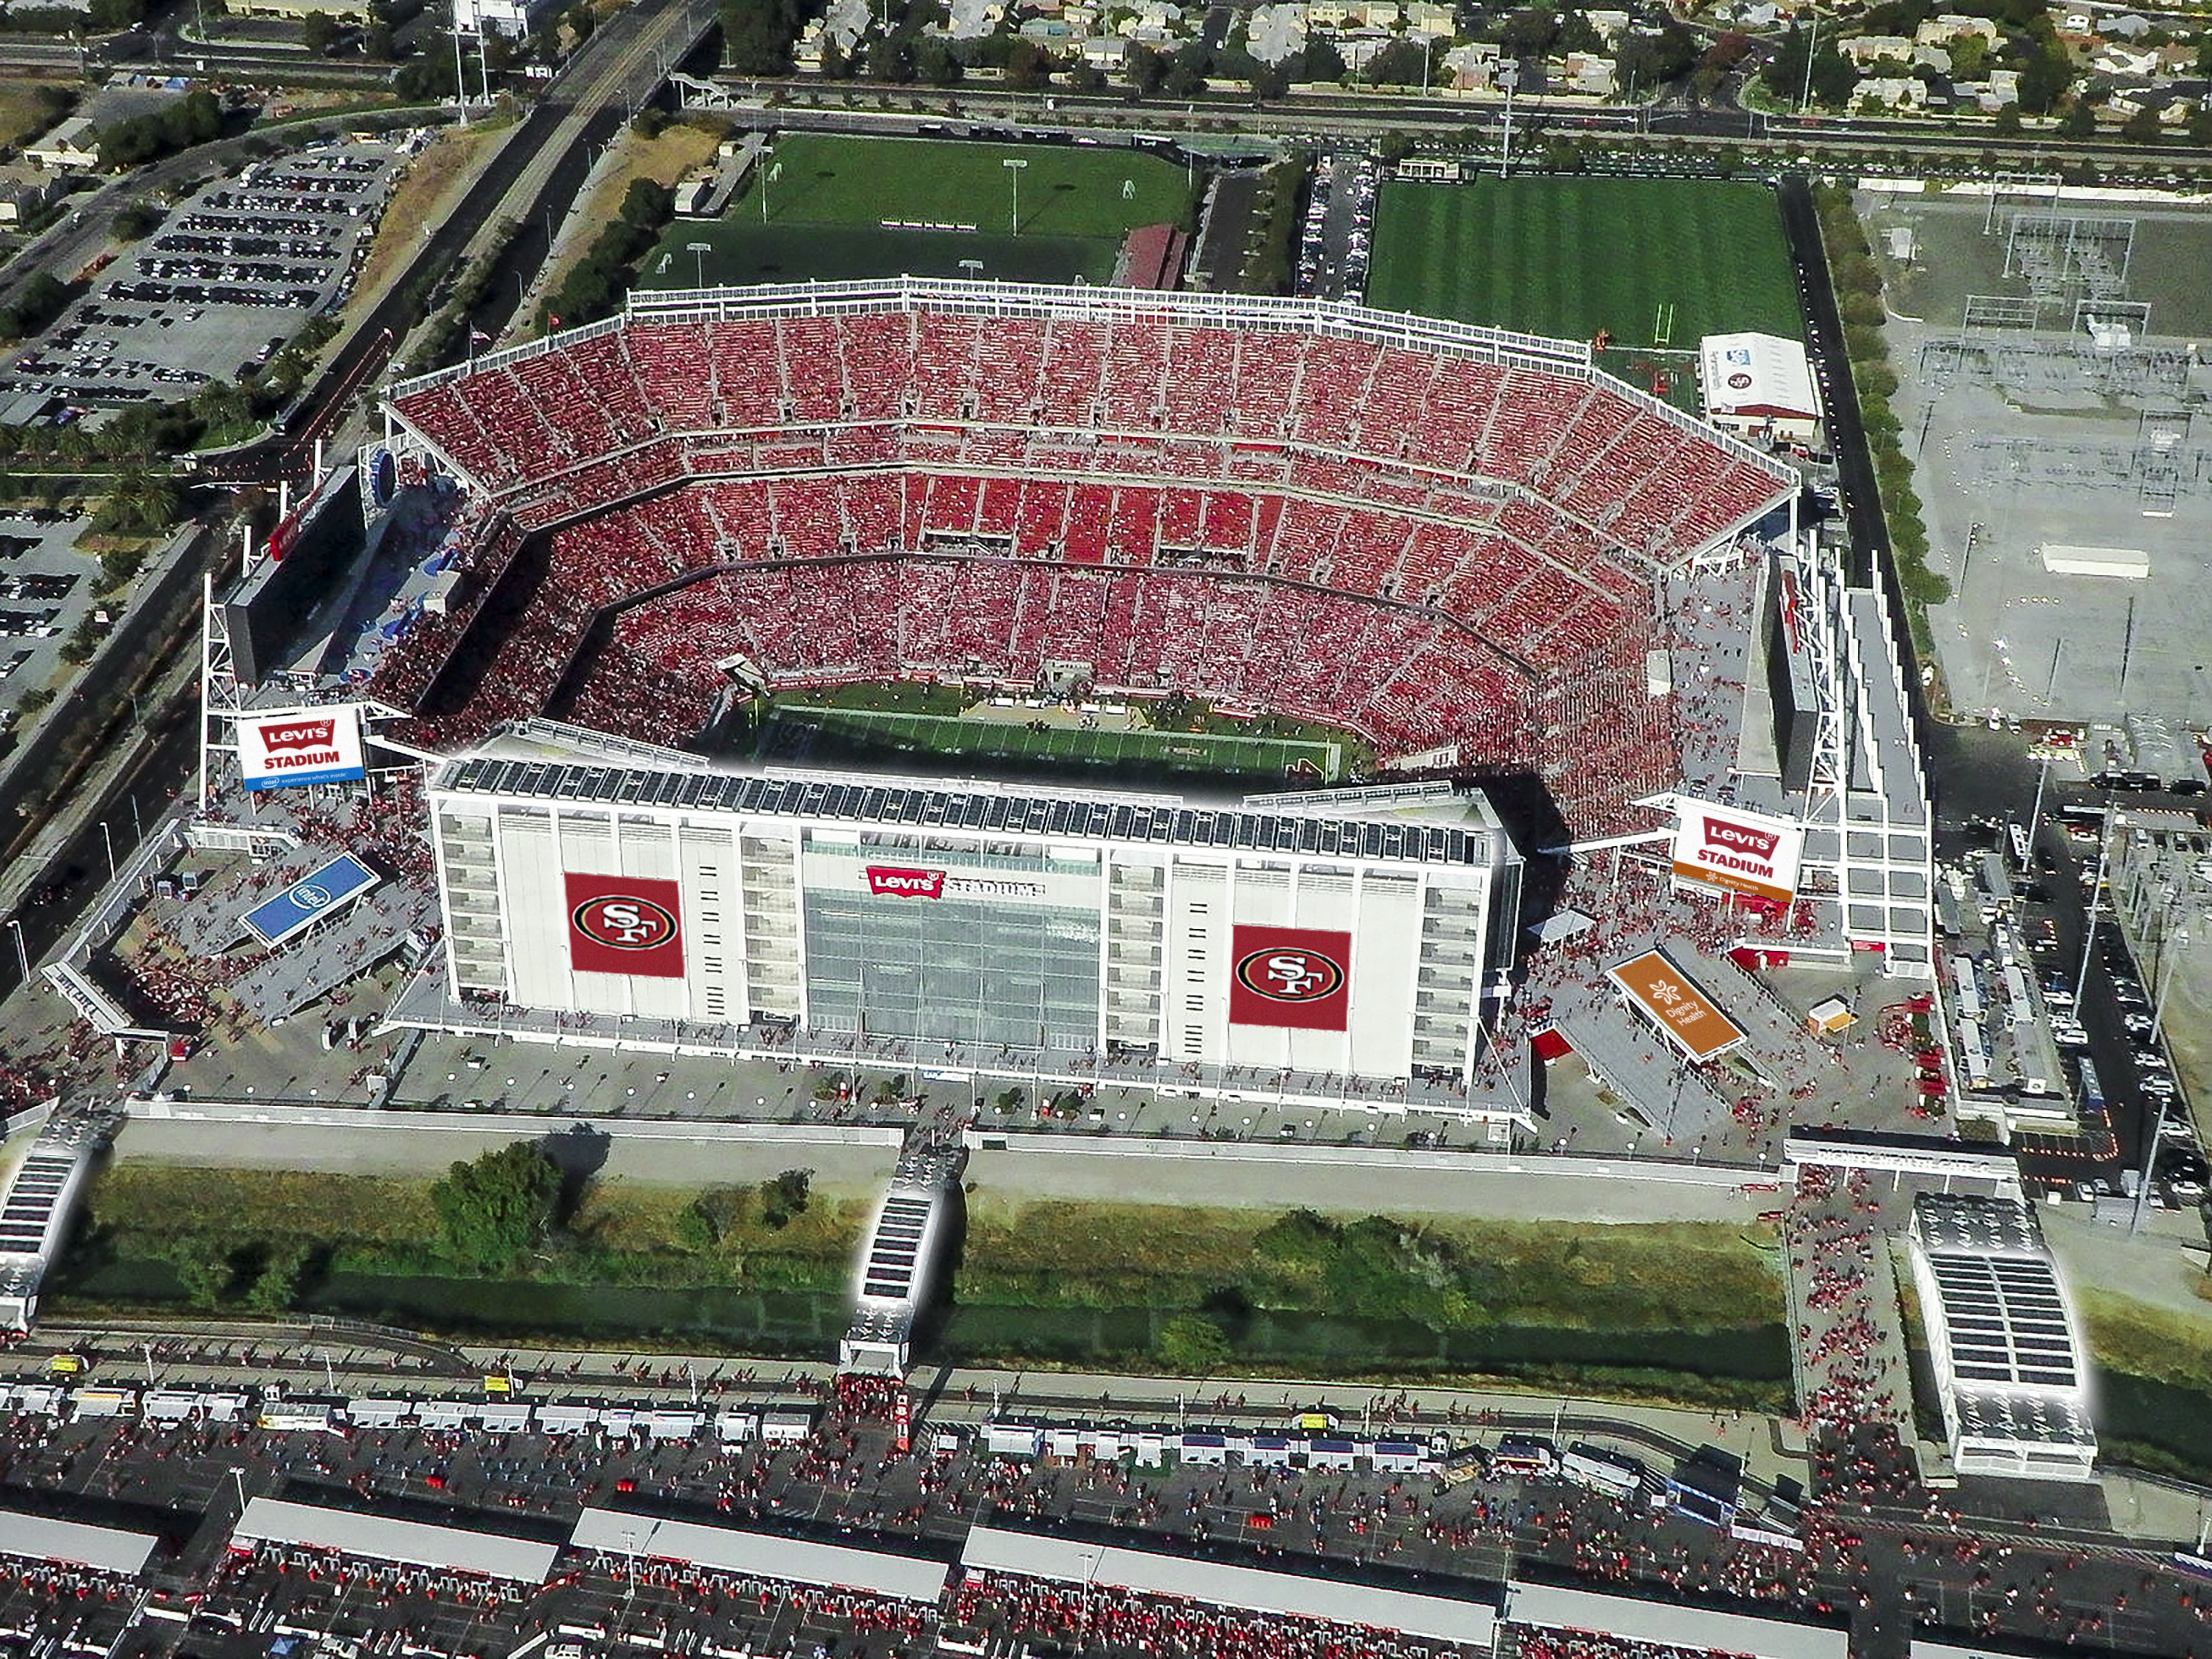 This year will be a solar-powered Super Bowl